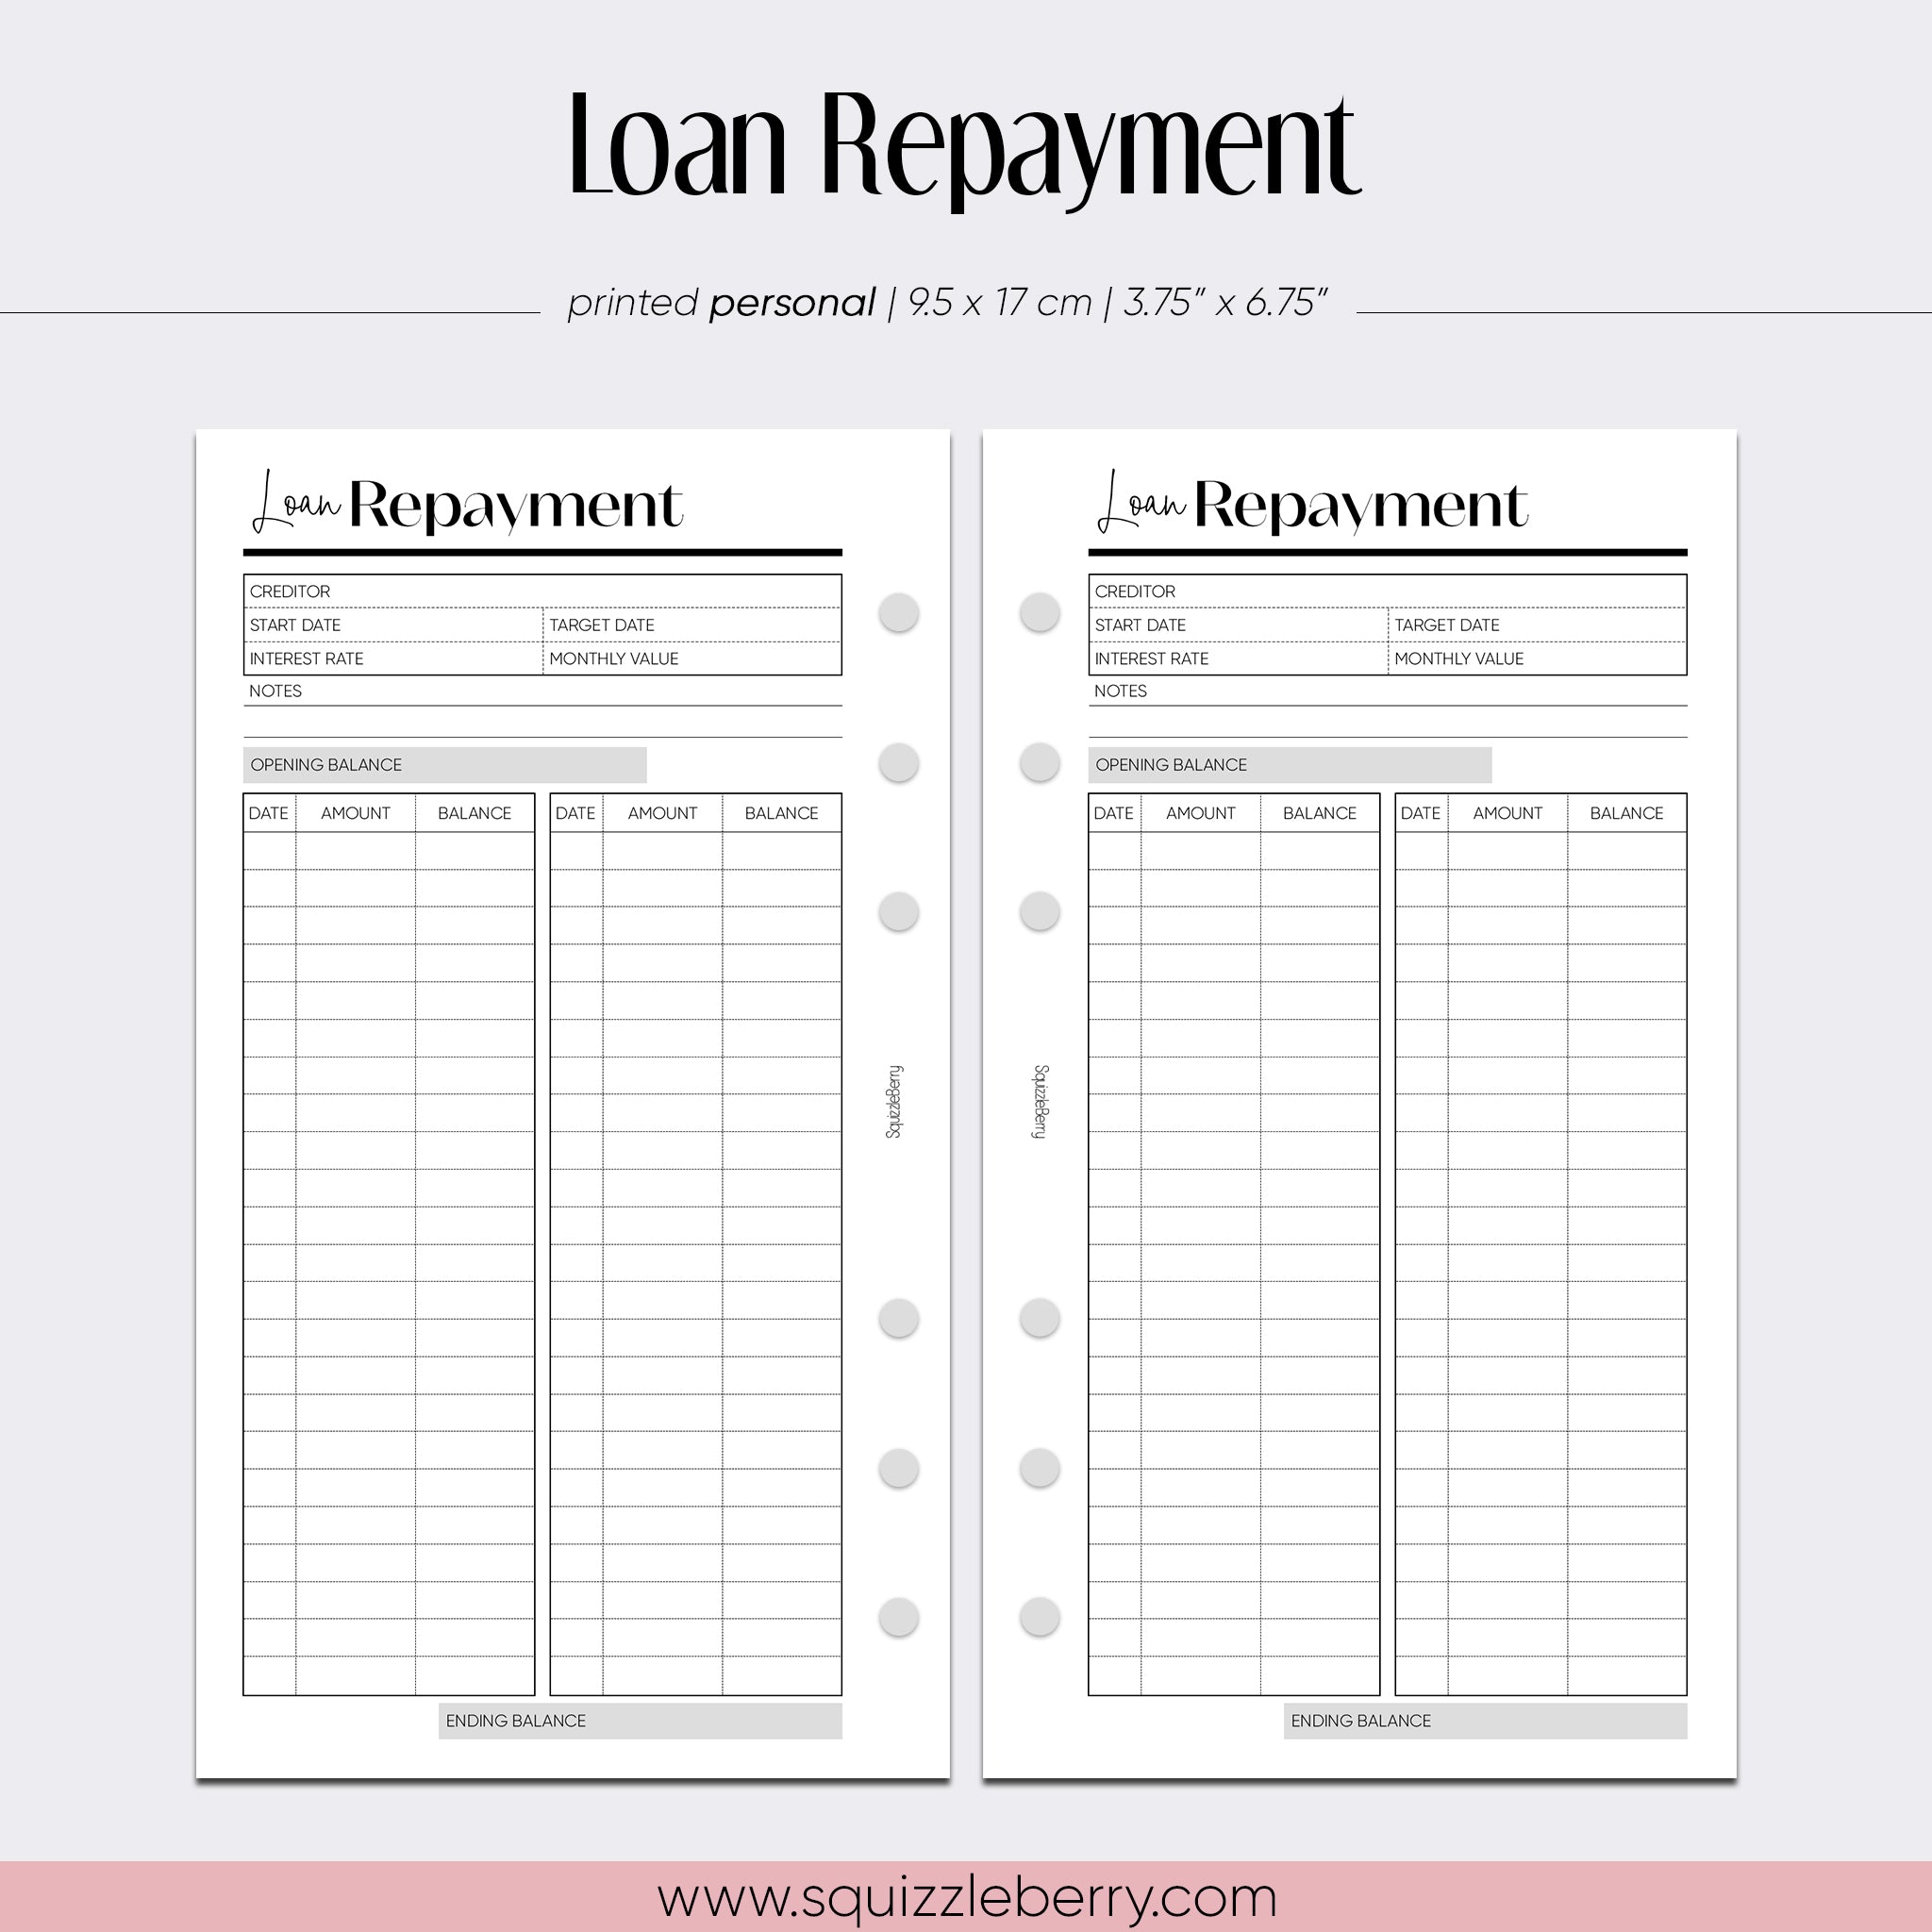 Loan Repayment - Personal | SquizzleBerry